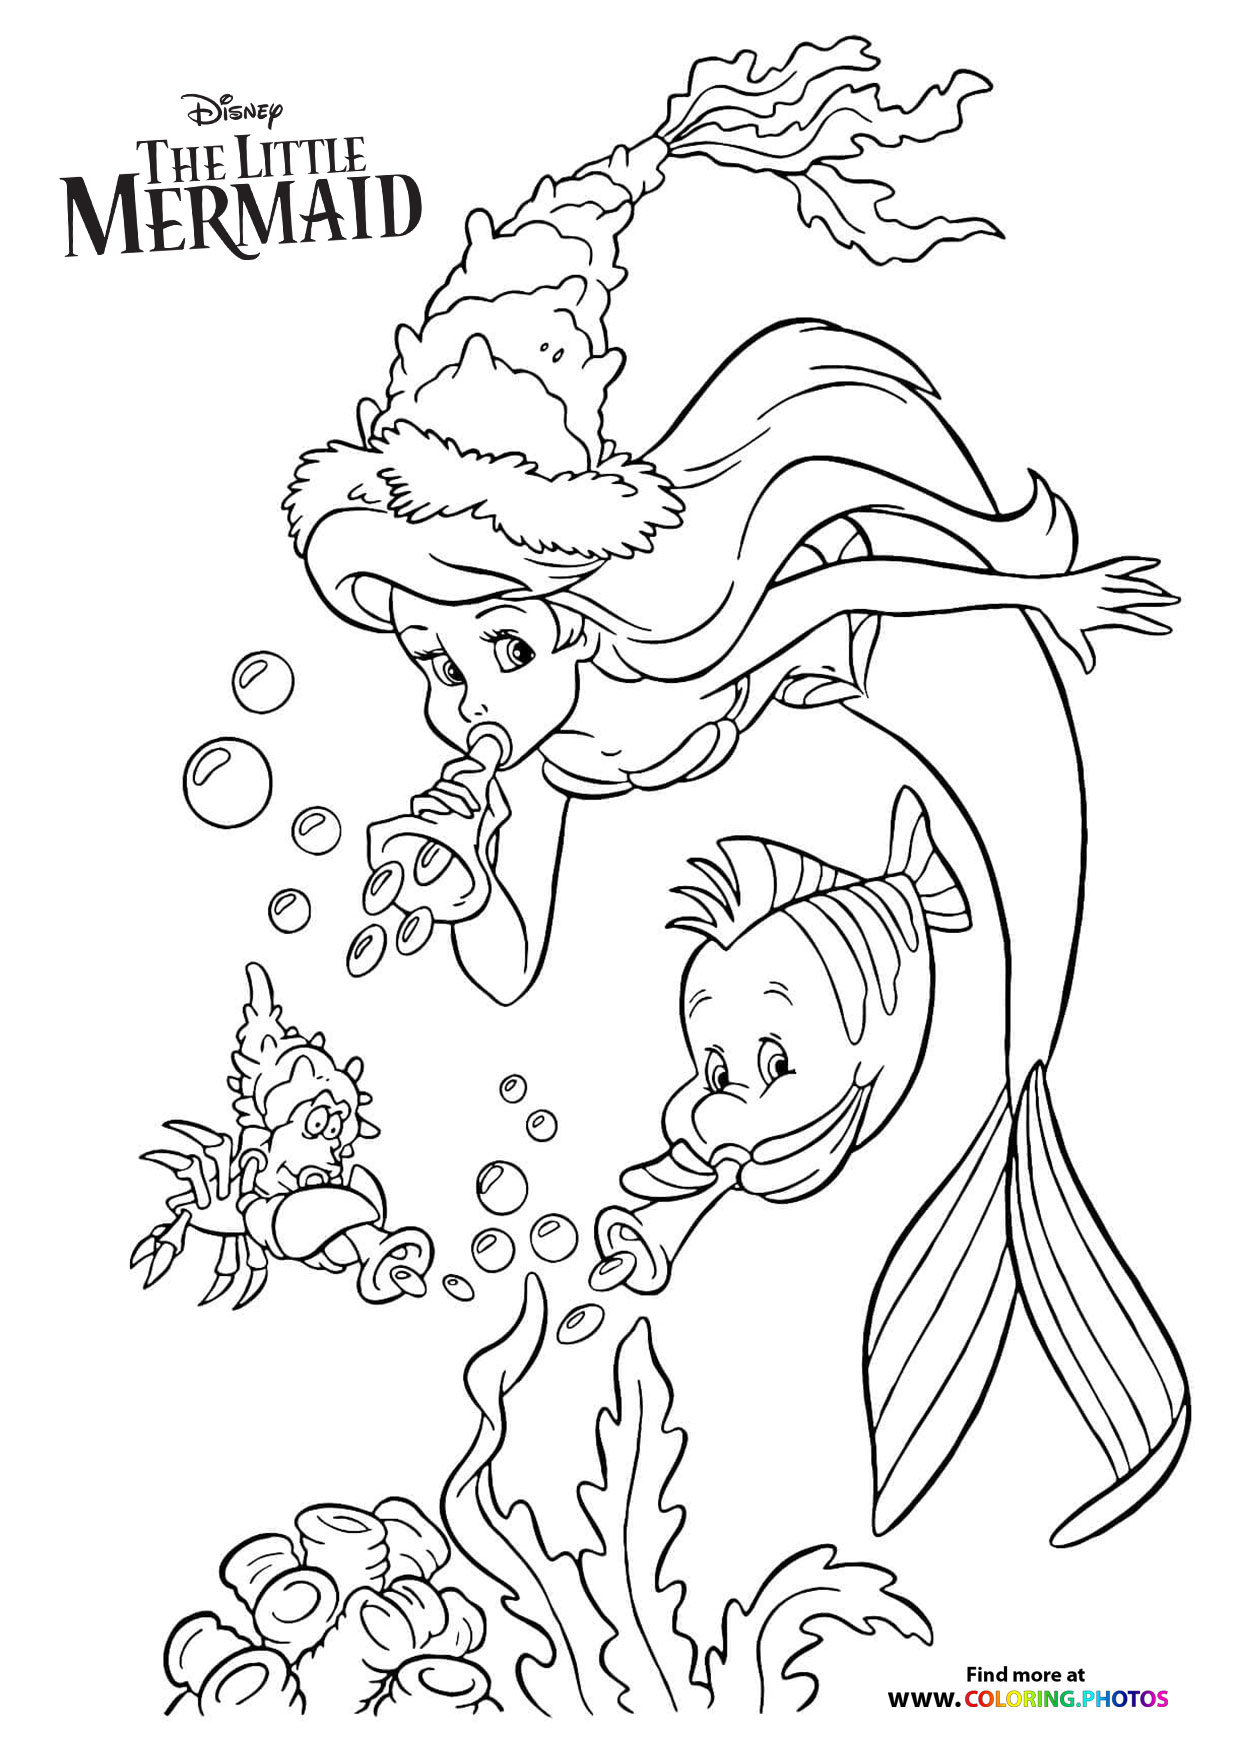 Ariel sebastian and flounder playing with bubbles